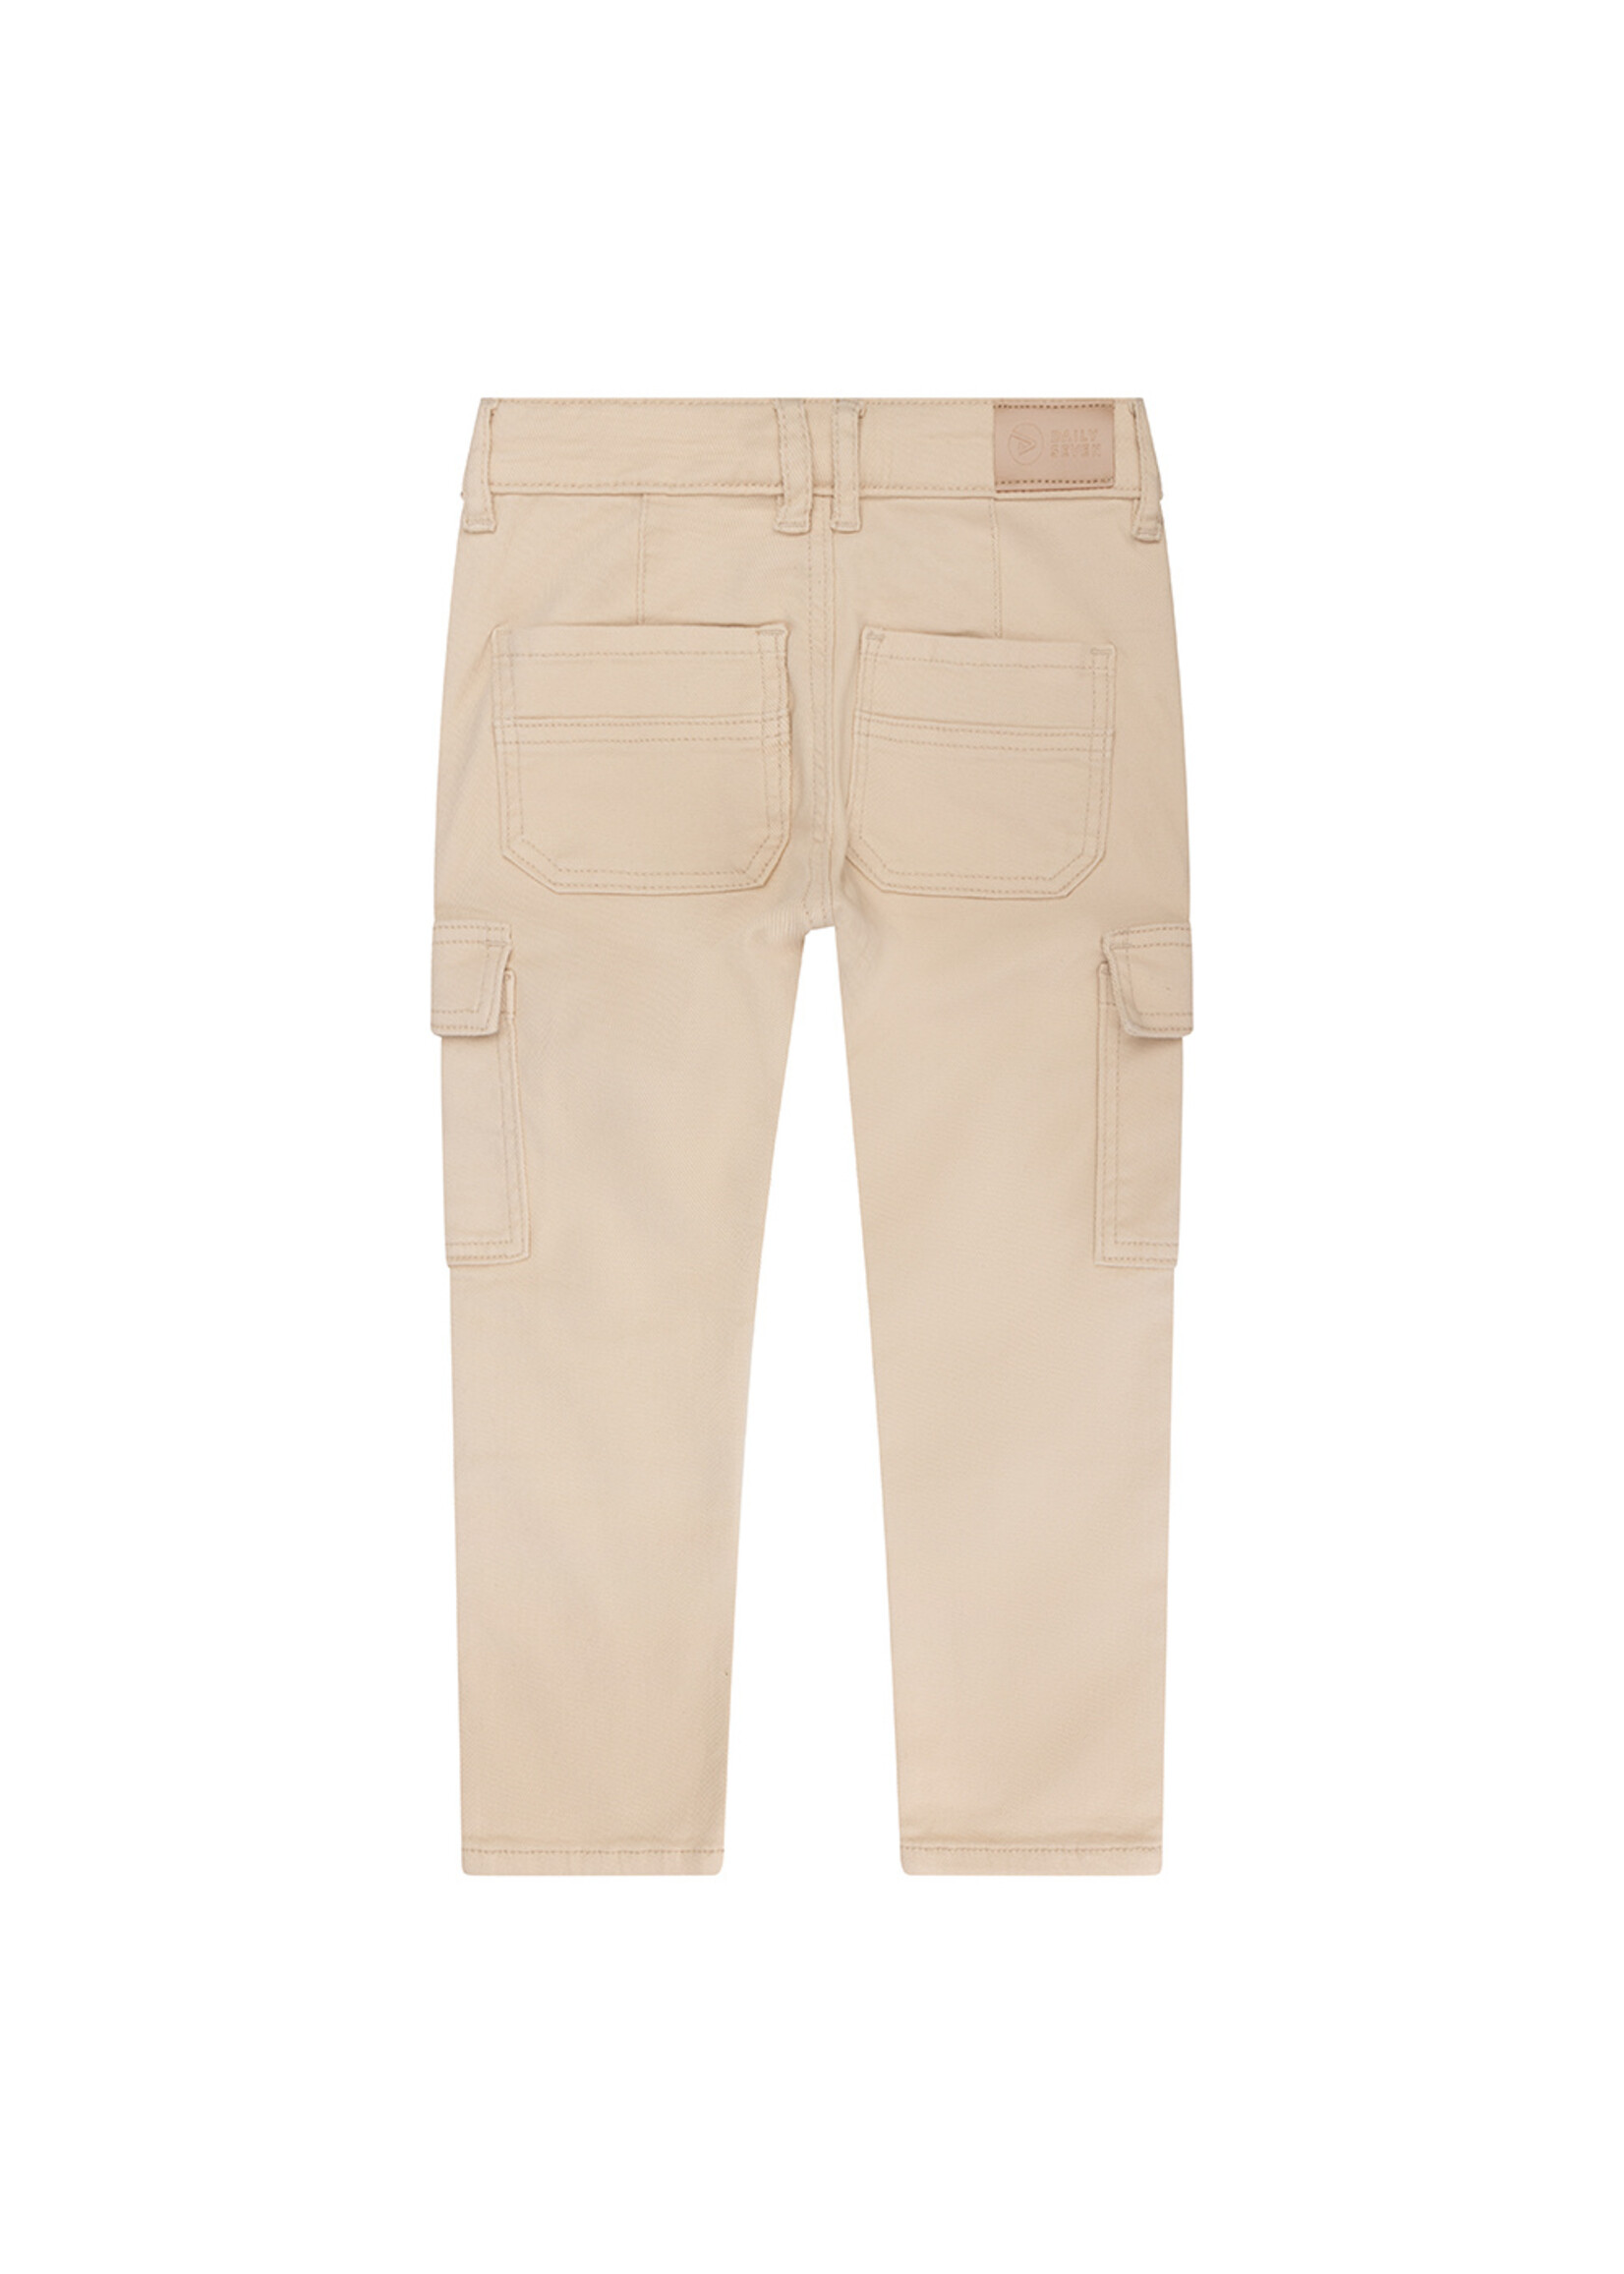 Daily7 Cargo Twill Pants Sandshell